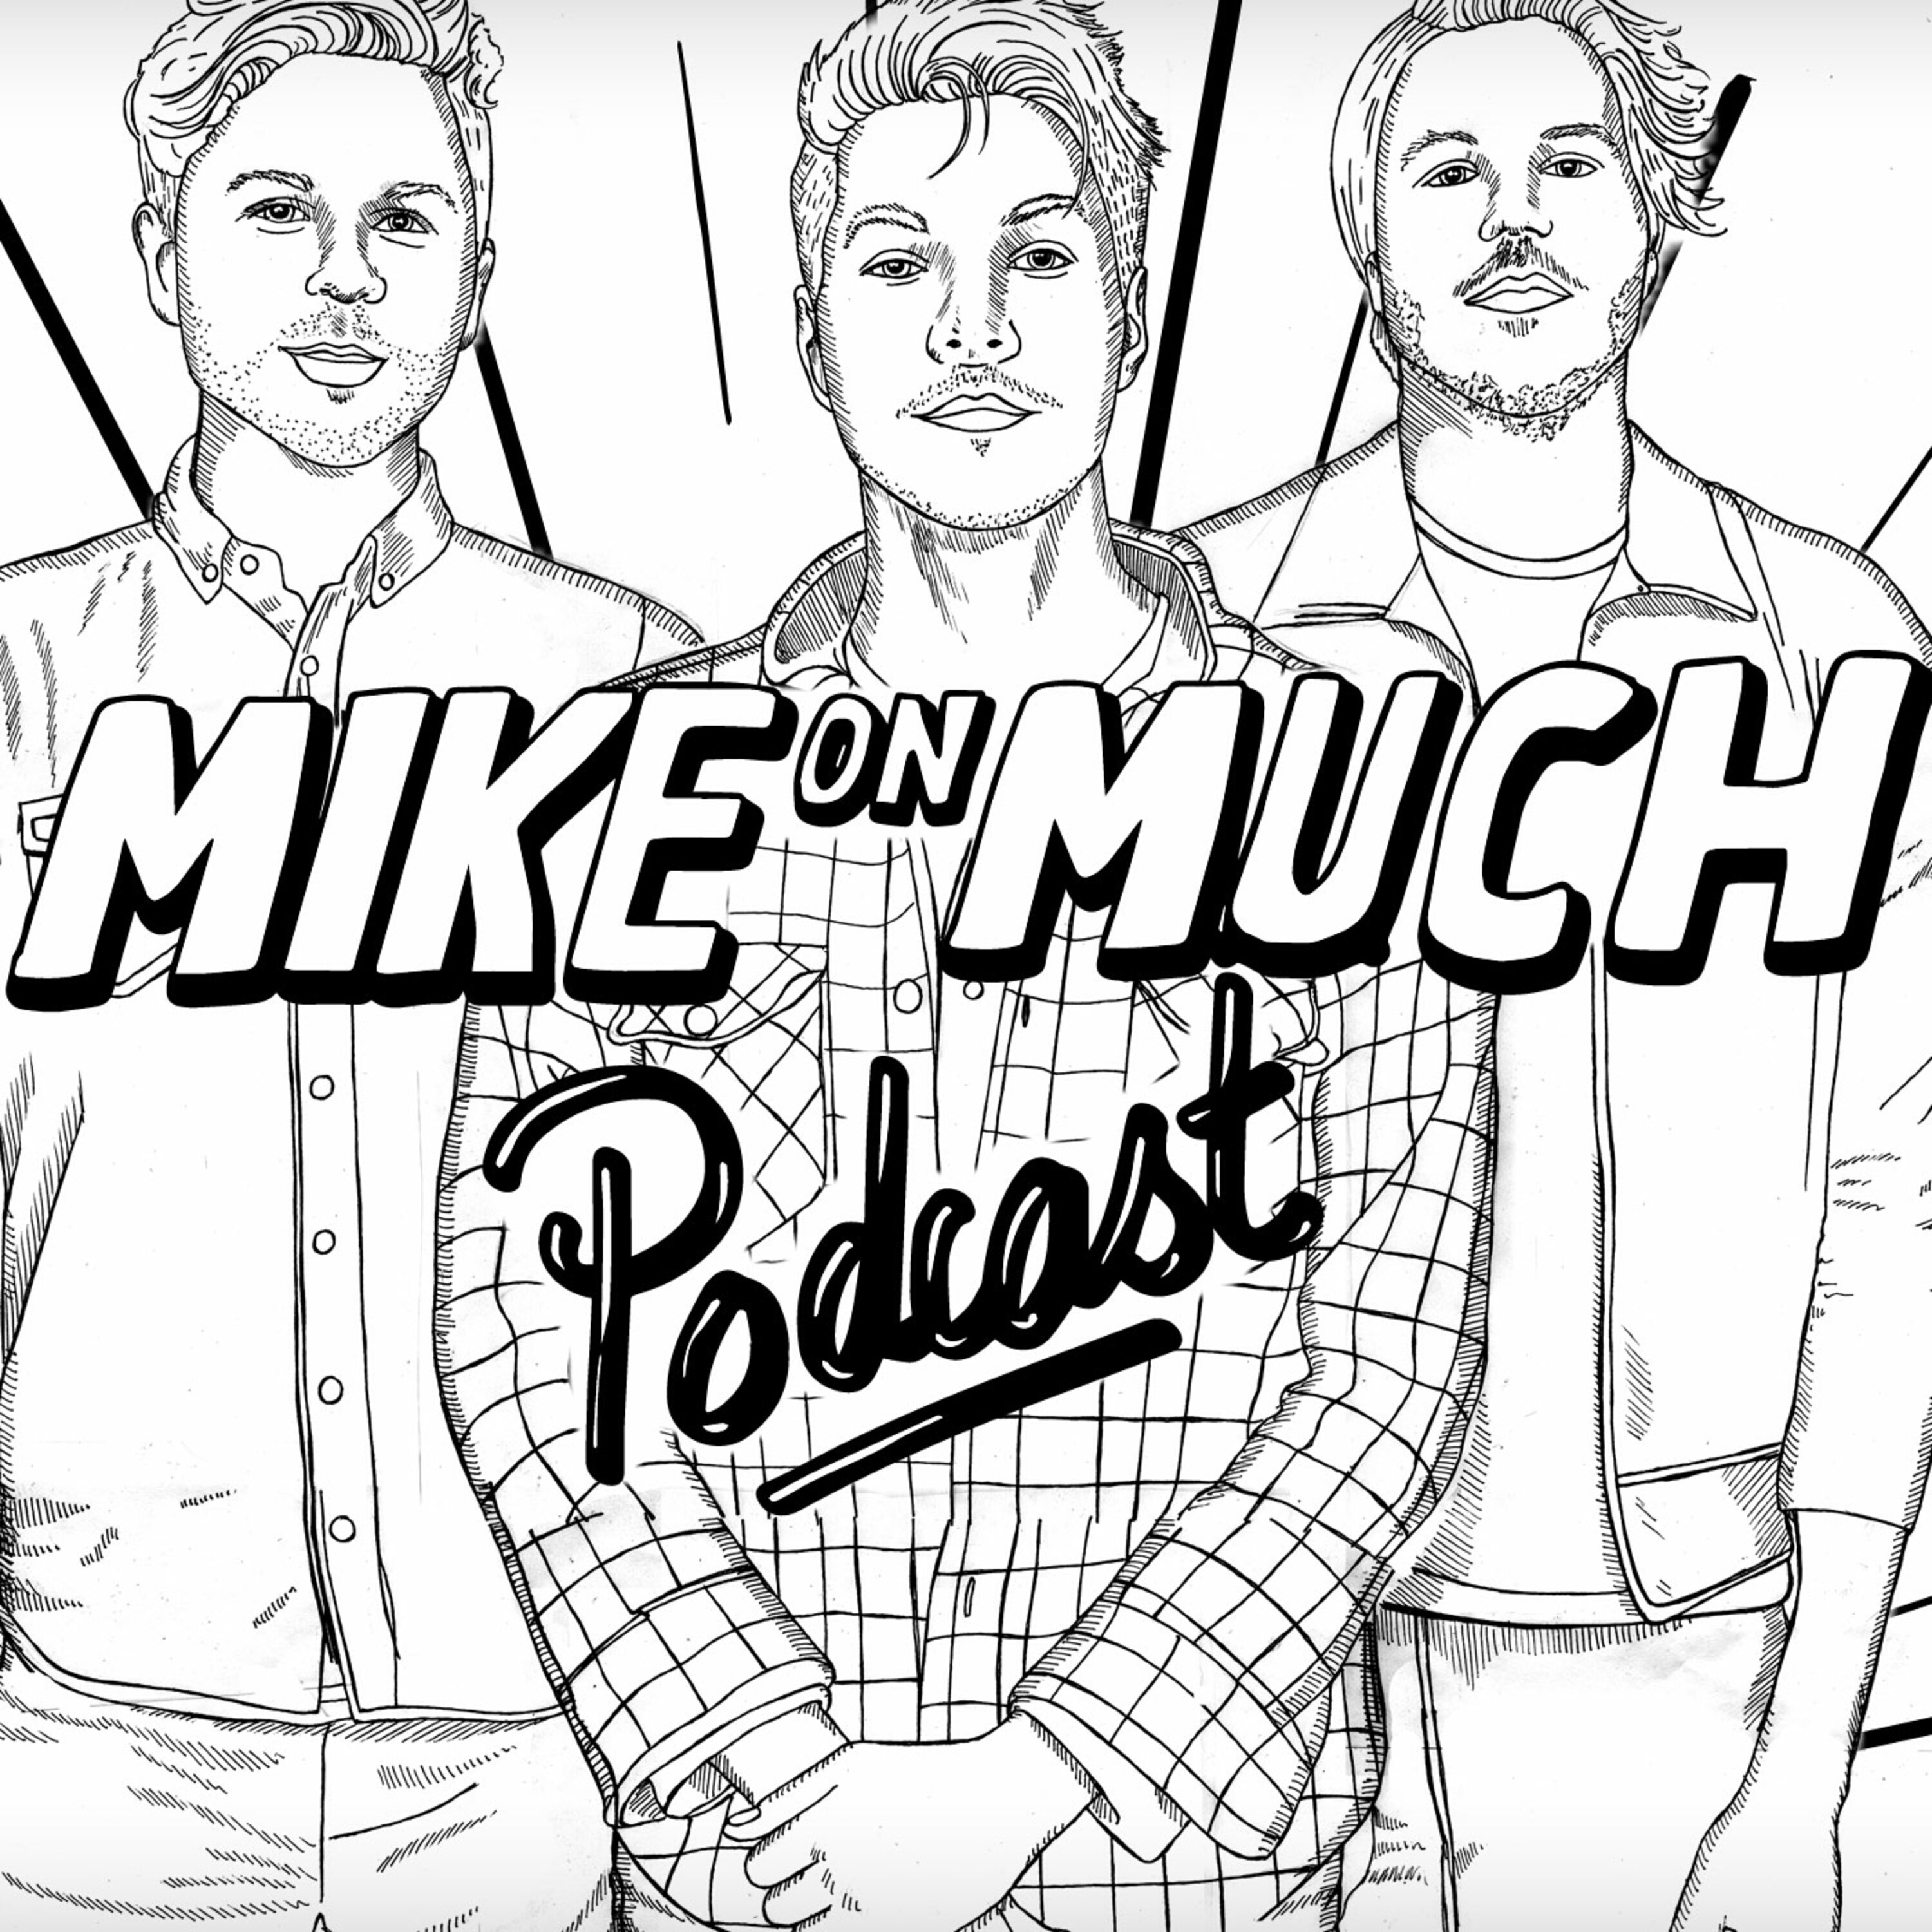 Season 1 Mike On Much: “How Often Is Your Life On The Line?”